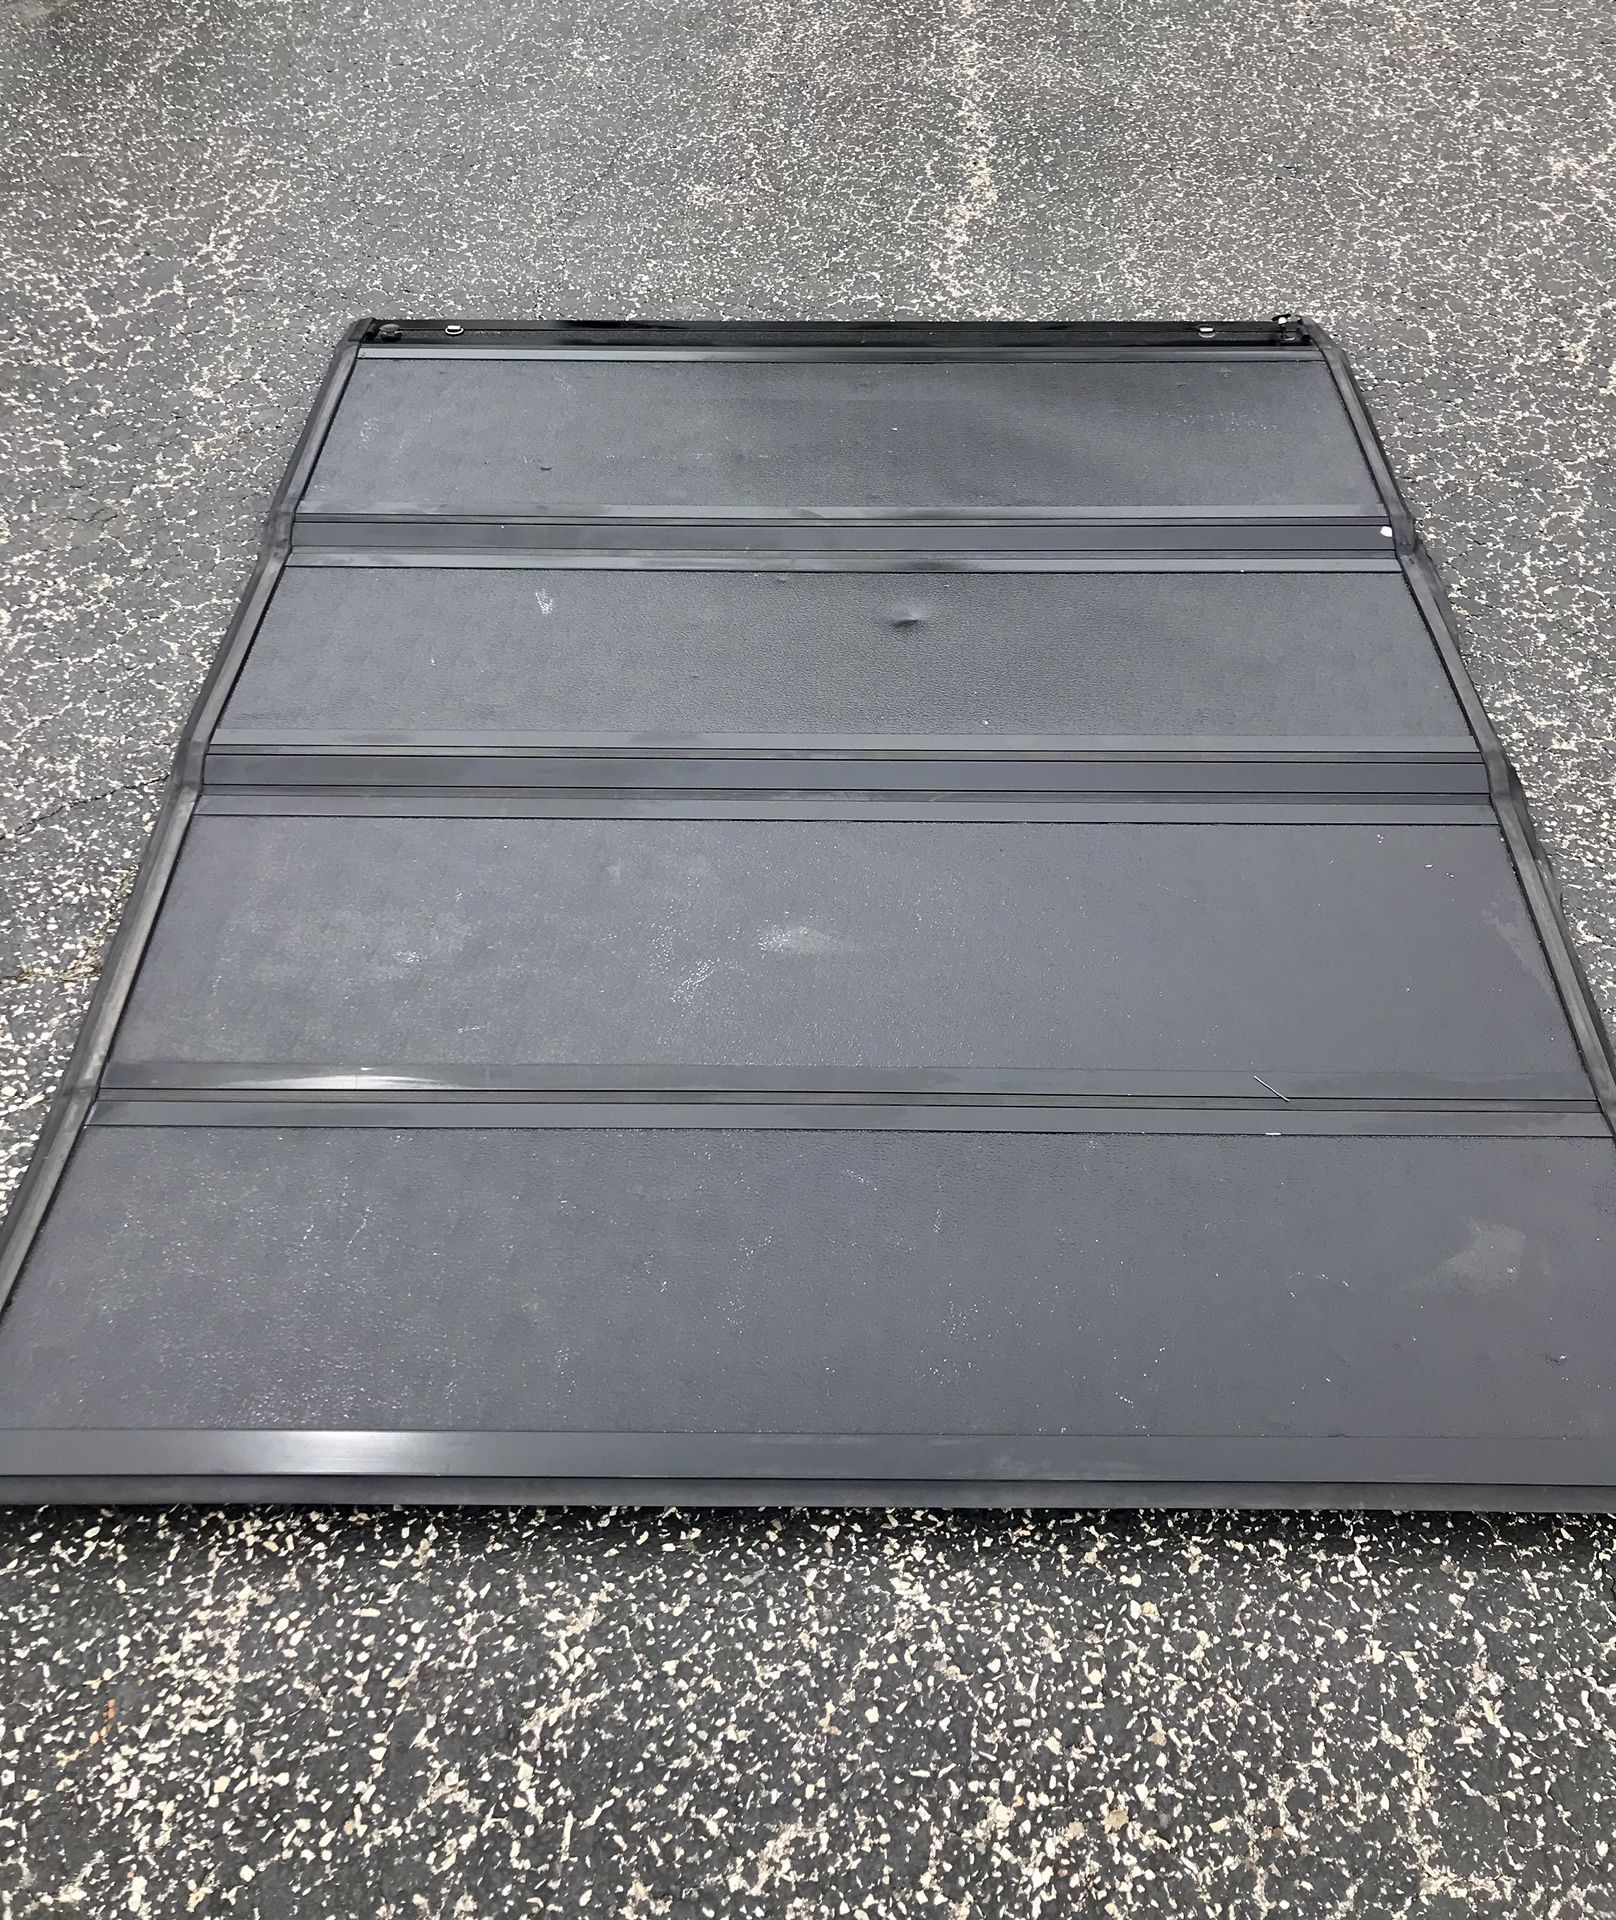 FORD F150 6.5 HARD TRUCK BED COVER.